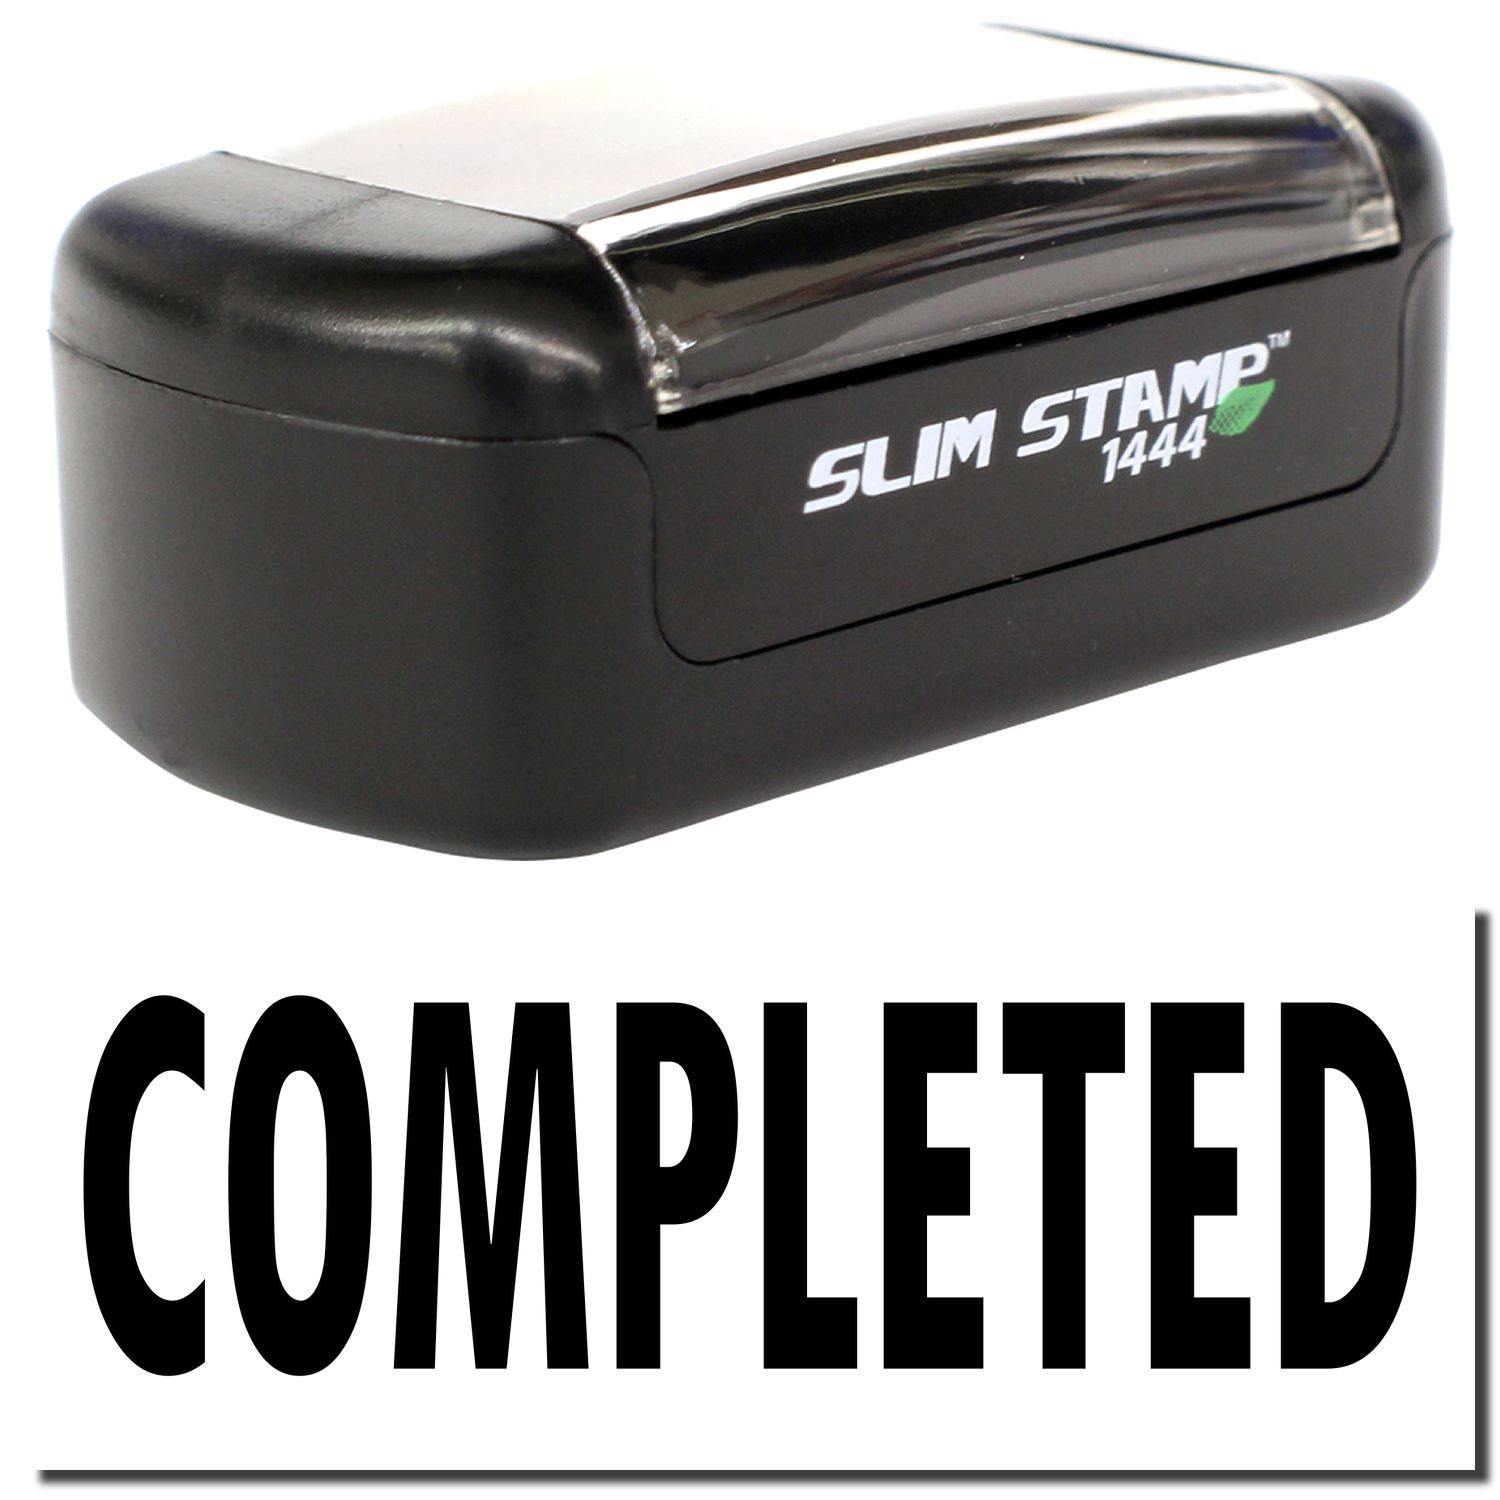 A stock office pre-inked stamp with a stamped image showing how the text "COMPLETED" is displayed after stamping.